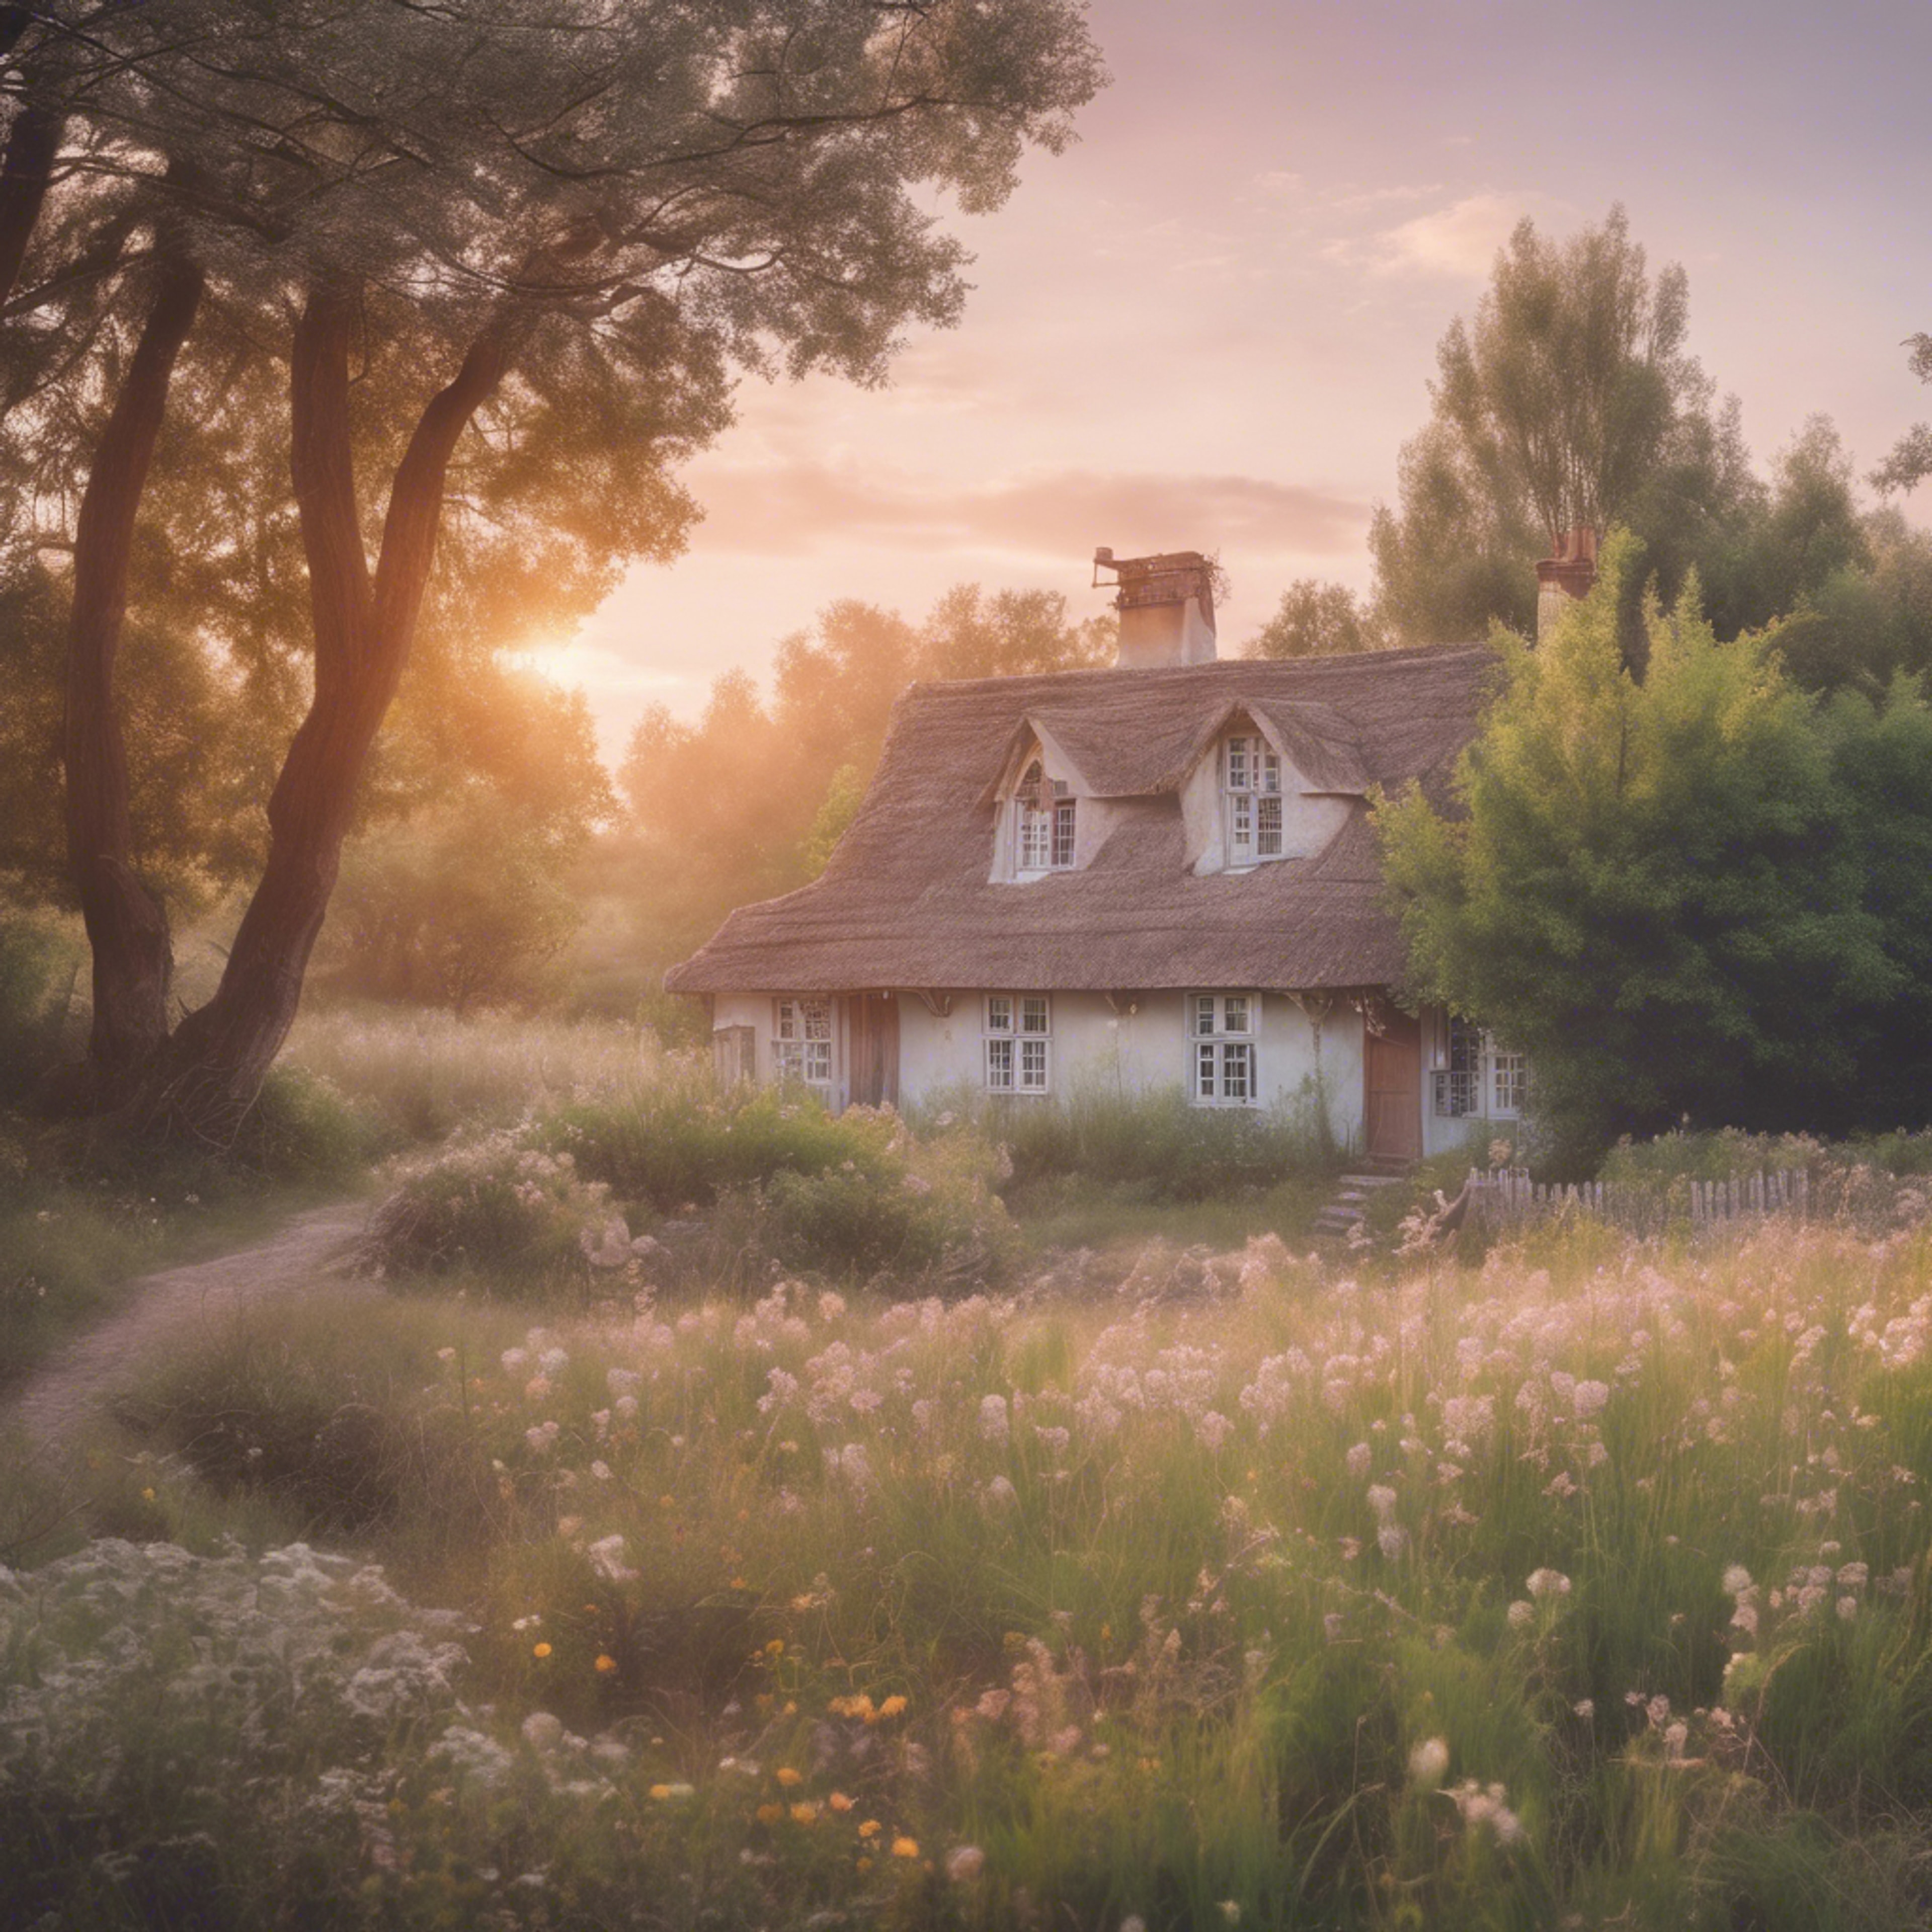 A soft pastel sunrise over rustic cottages, birthing ethereal aesthetic beauty Тапет[daea3b7a39e14a169eb1]